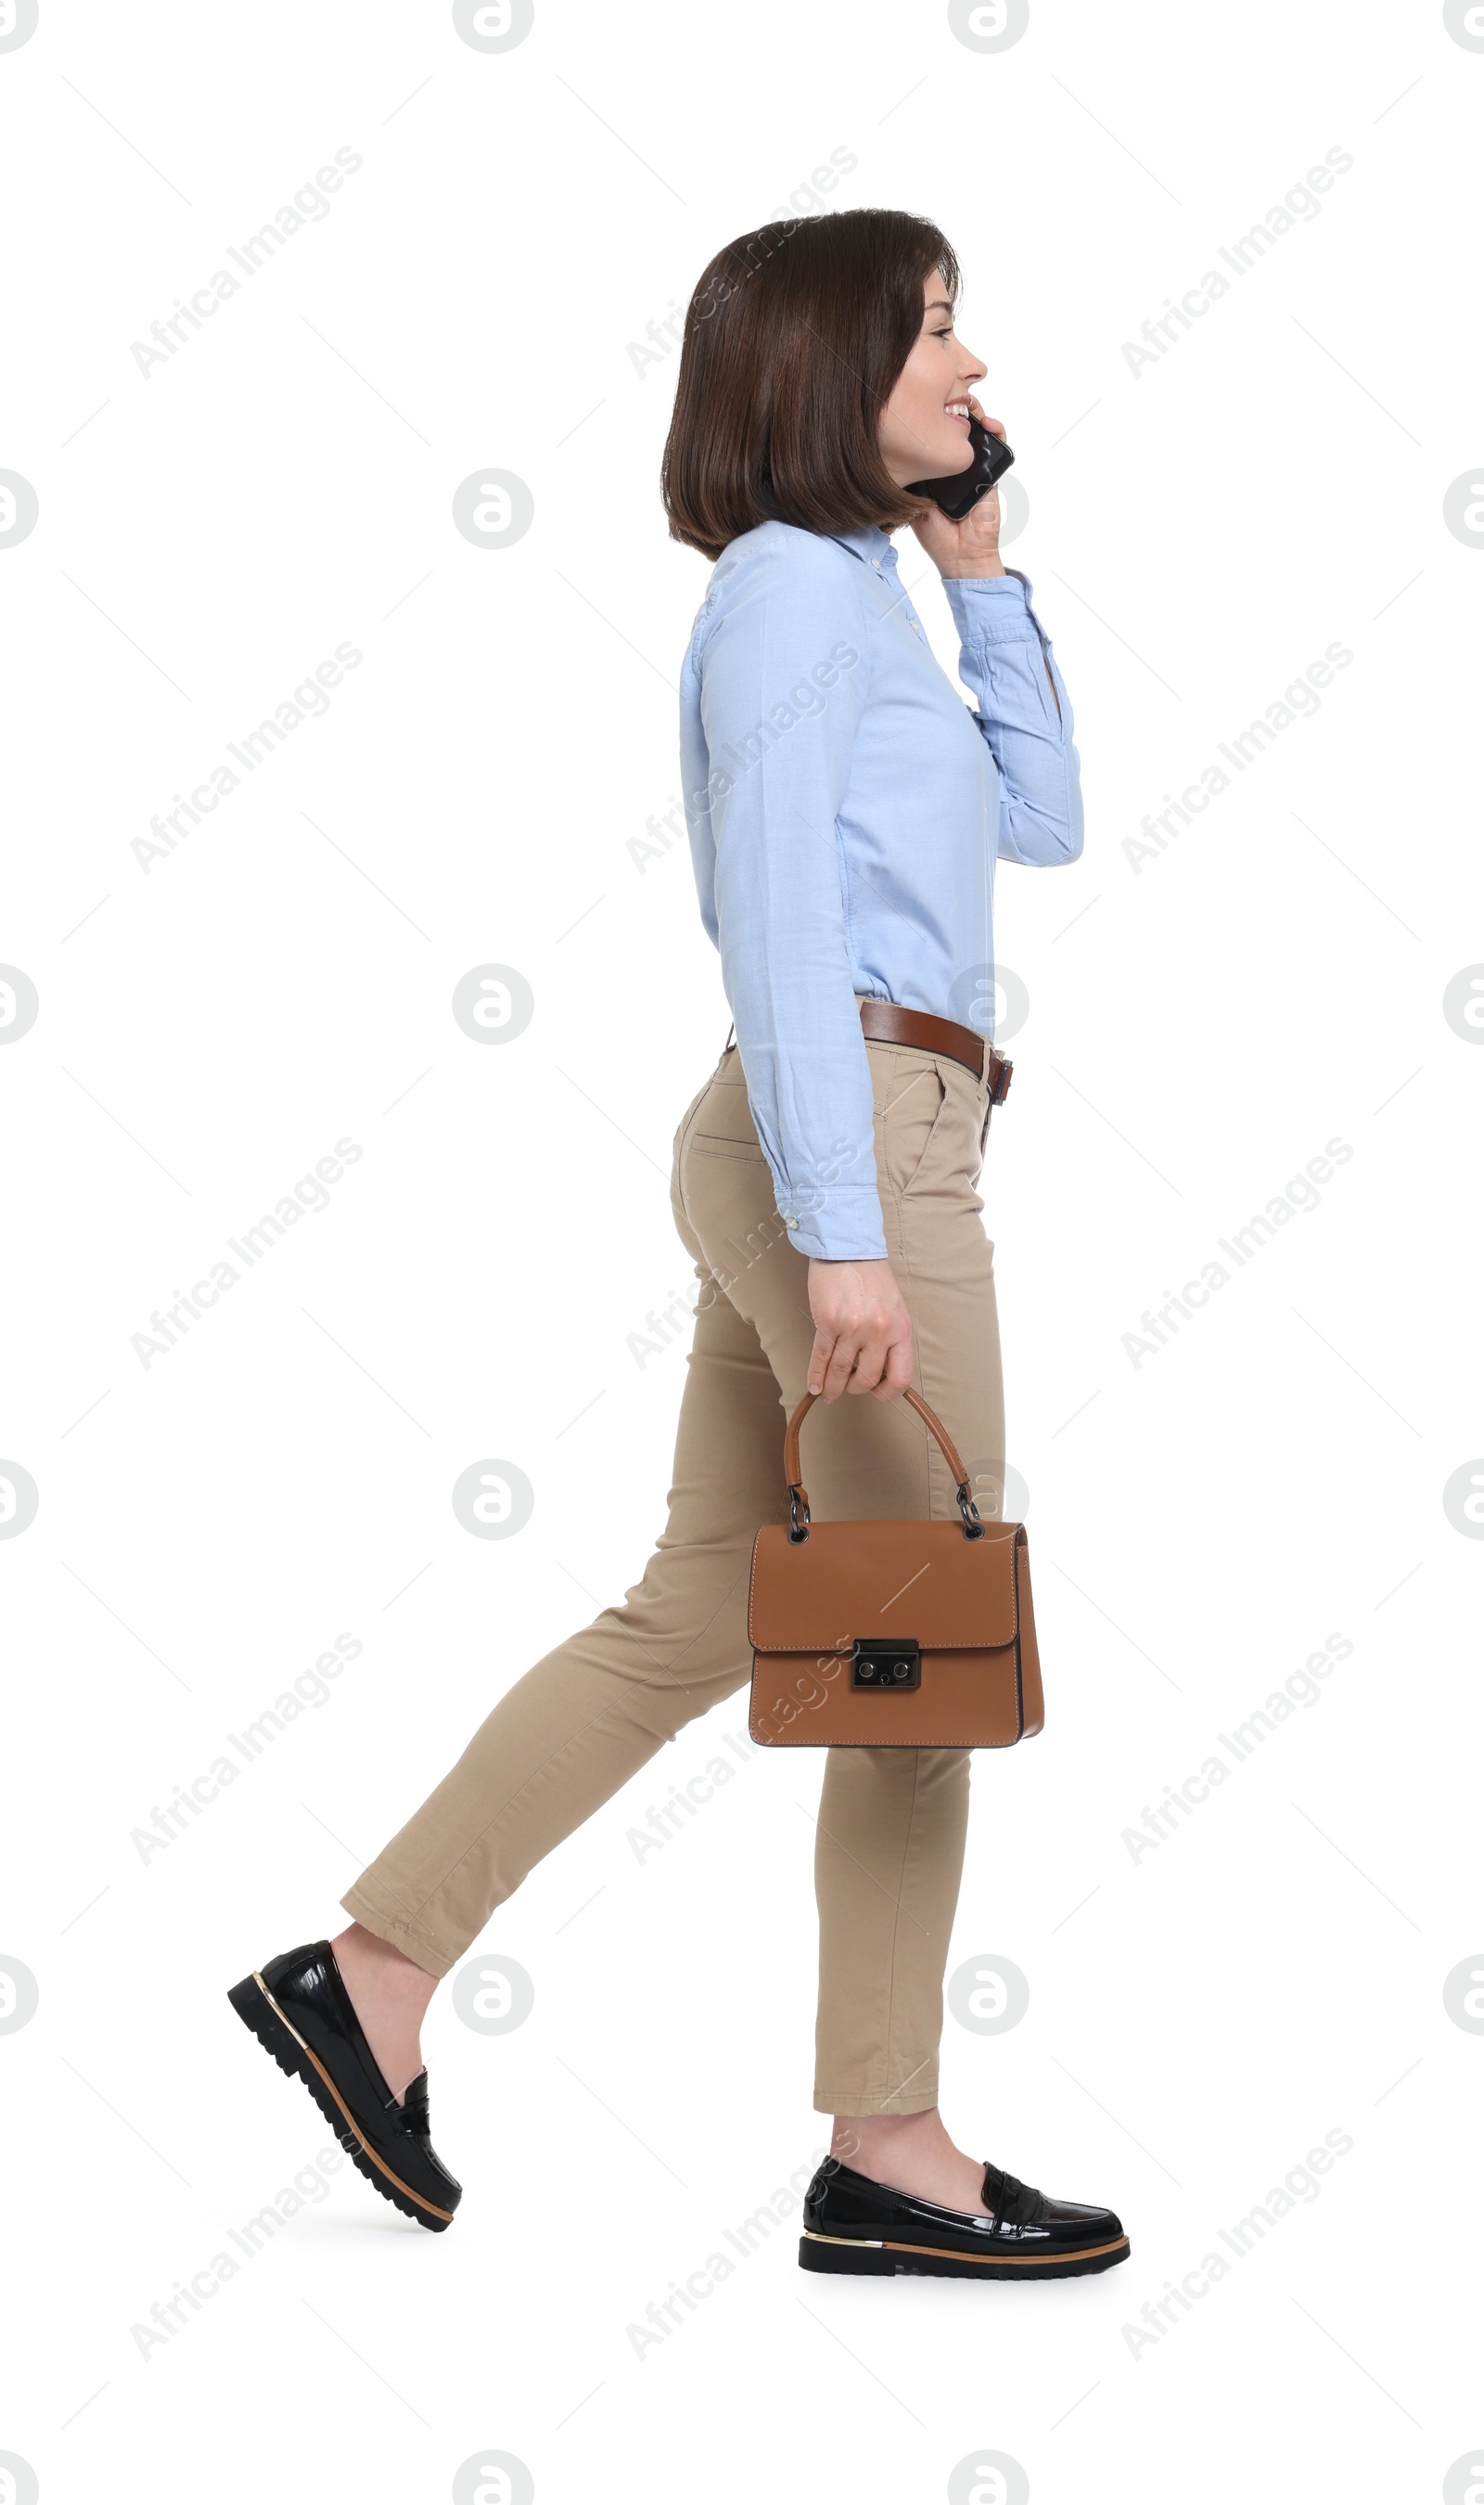 Photo of Happy woman with bag talking on smartphone against white background